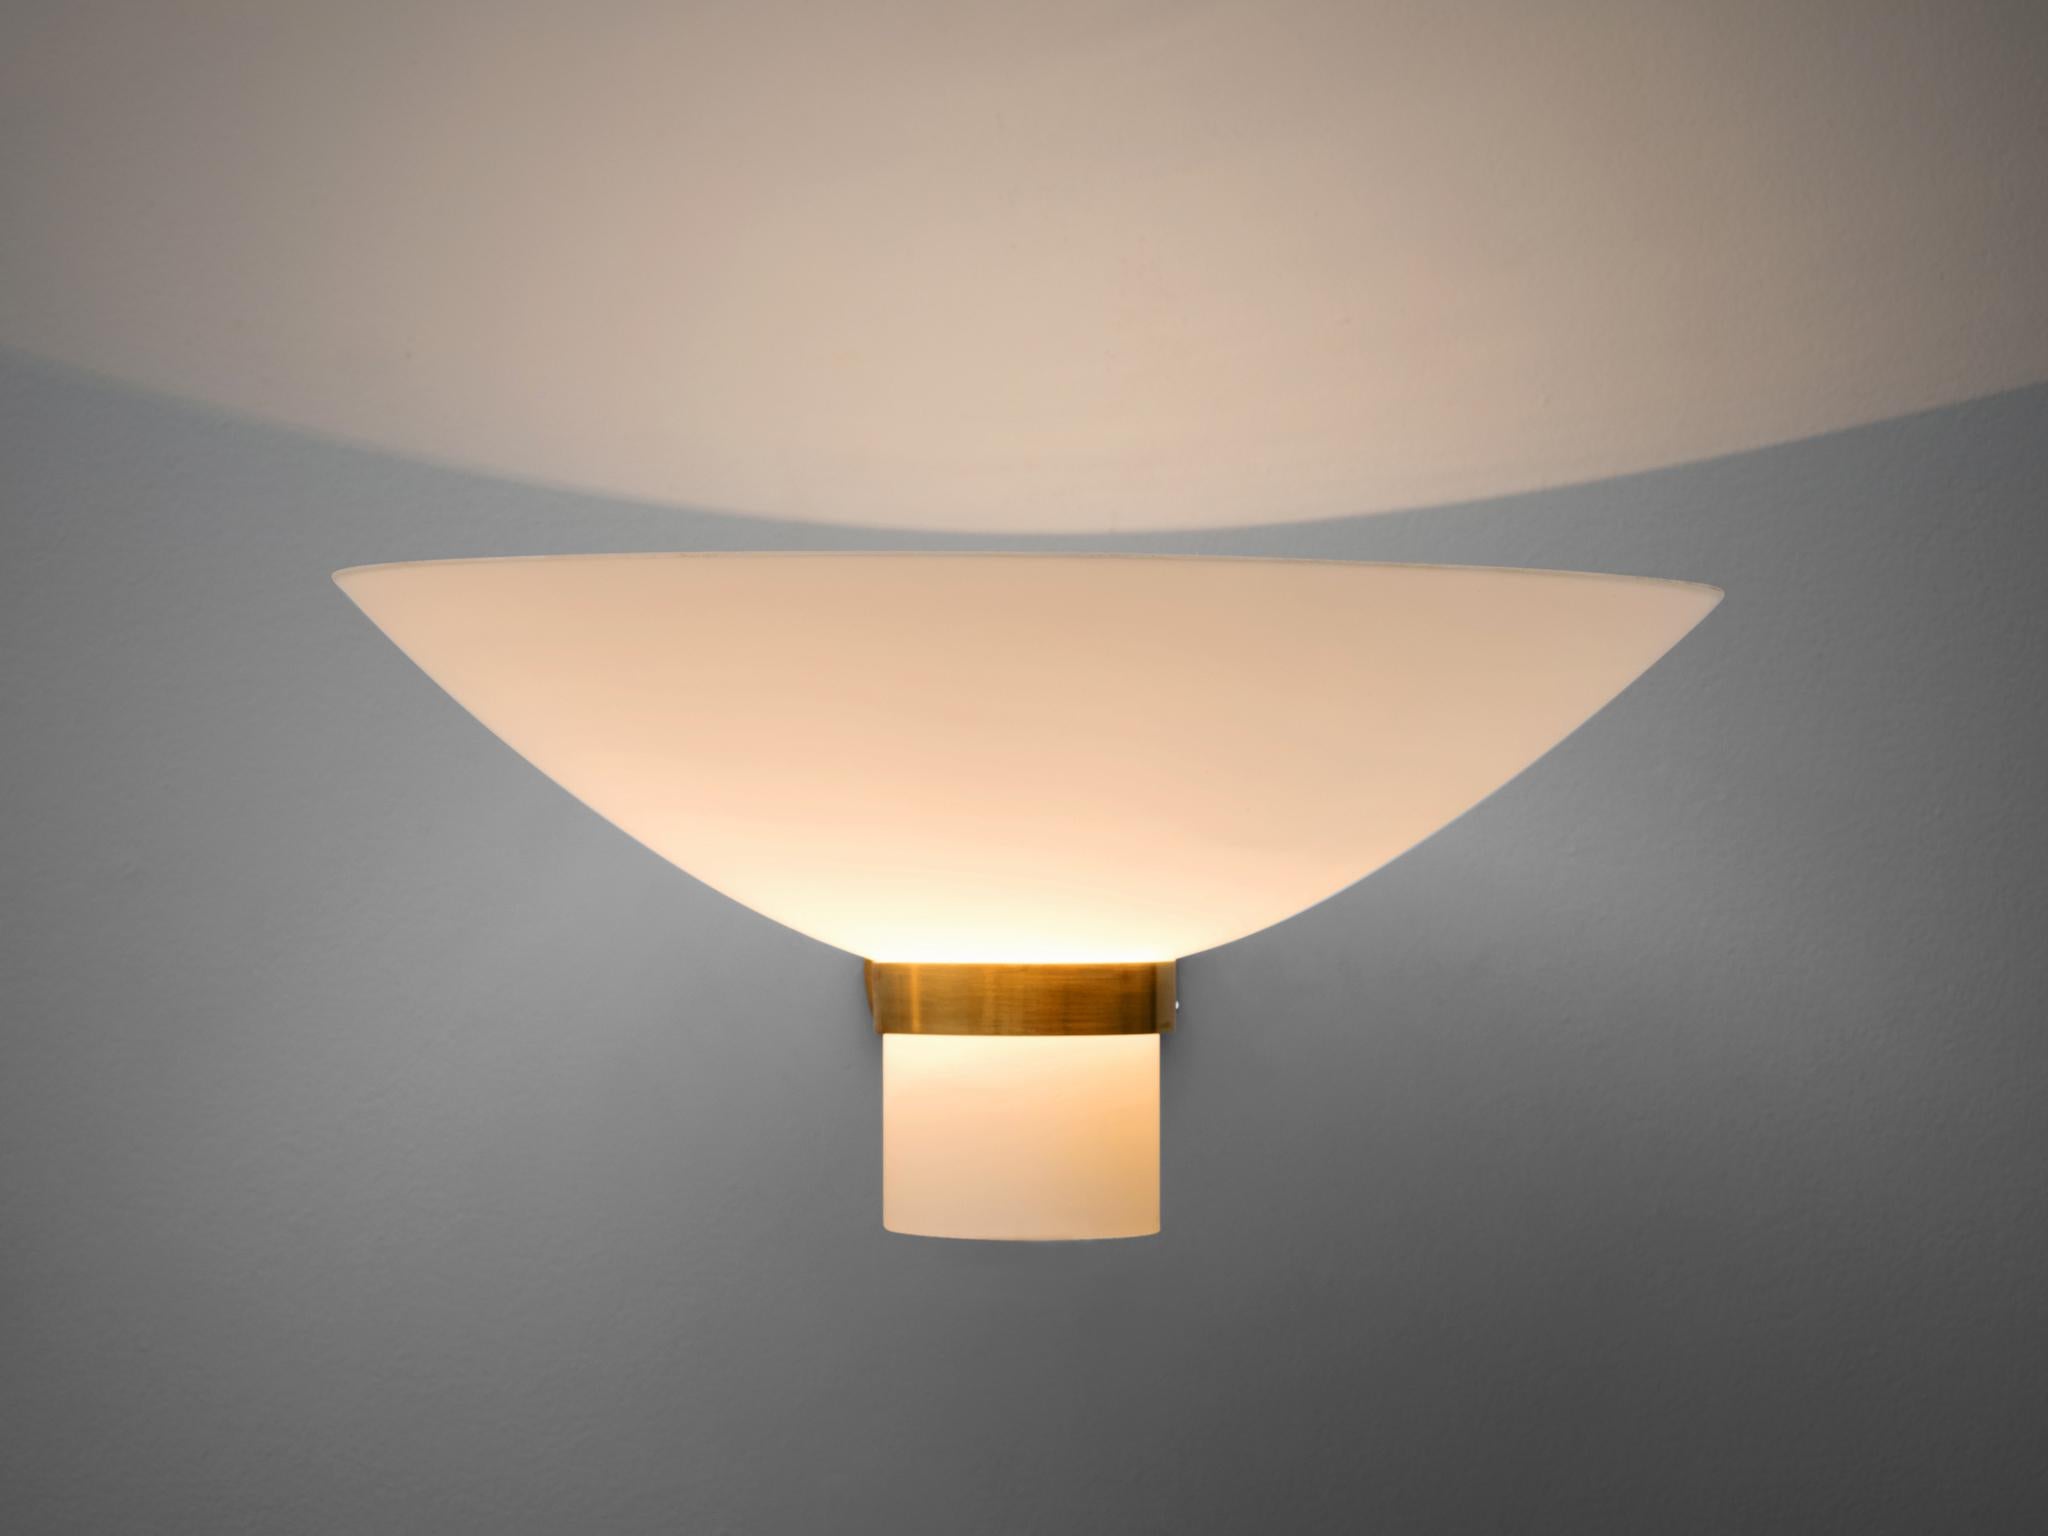 Lyfa, wall light, solid brass, opal glass, Denmark, 1960s

A single wall light designed and manufactured by Lyfa, Denmark. The light is equipped with a large opaline glass shade and a minimalistic brass arm and wall fixture. The opal glass spreads